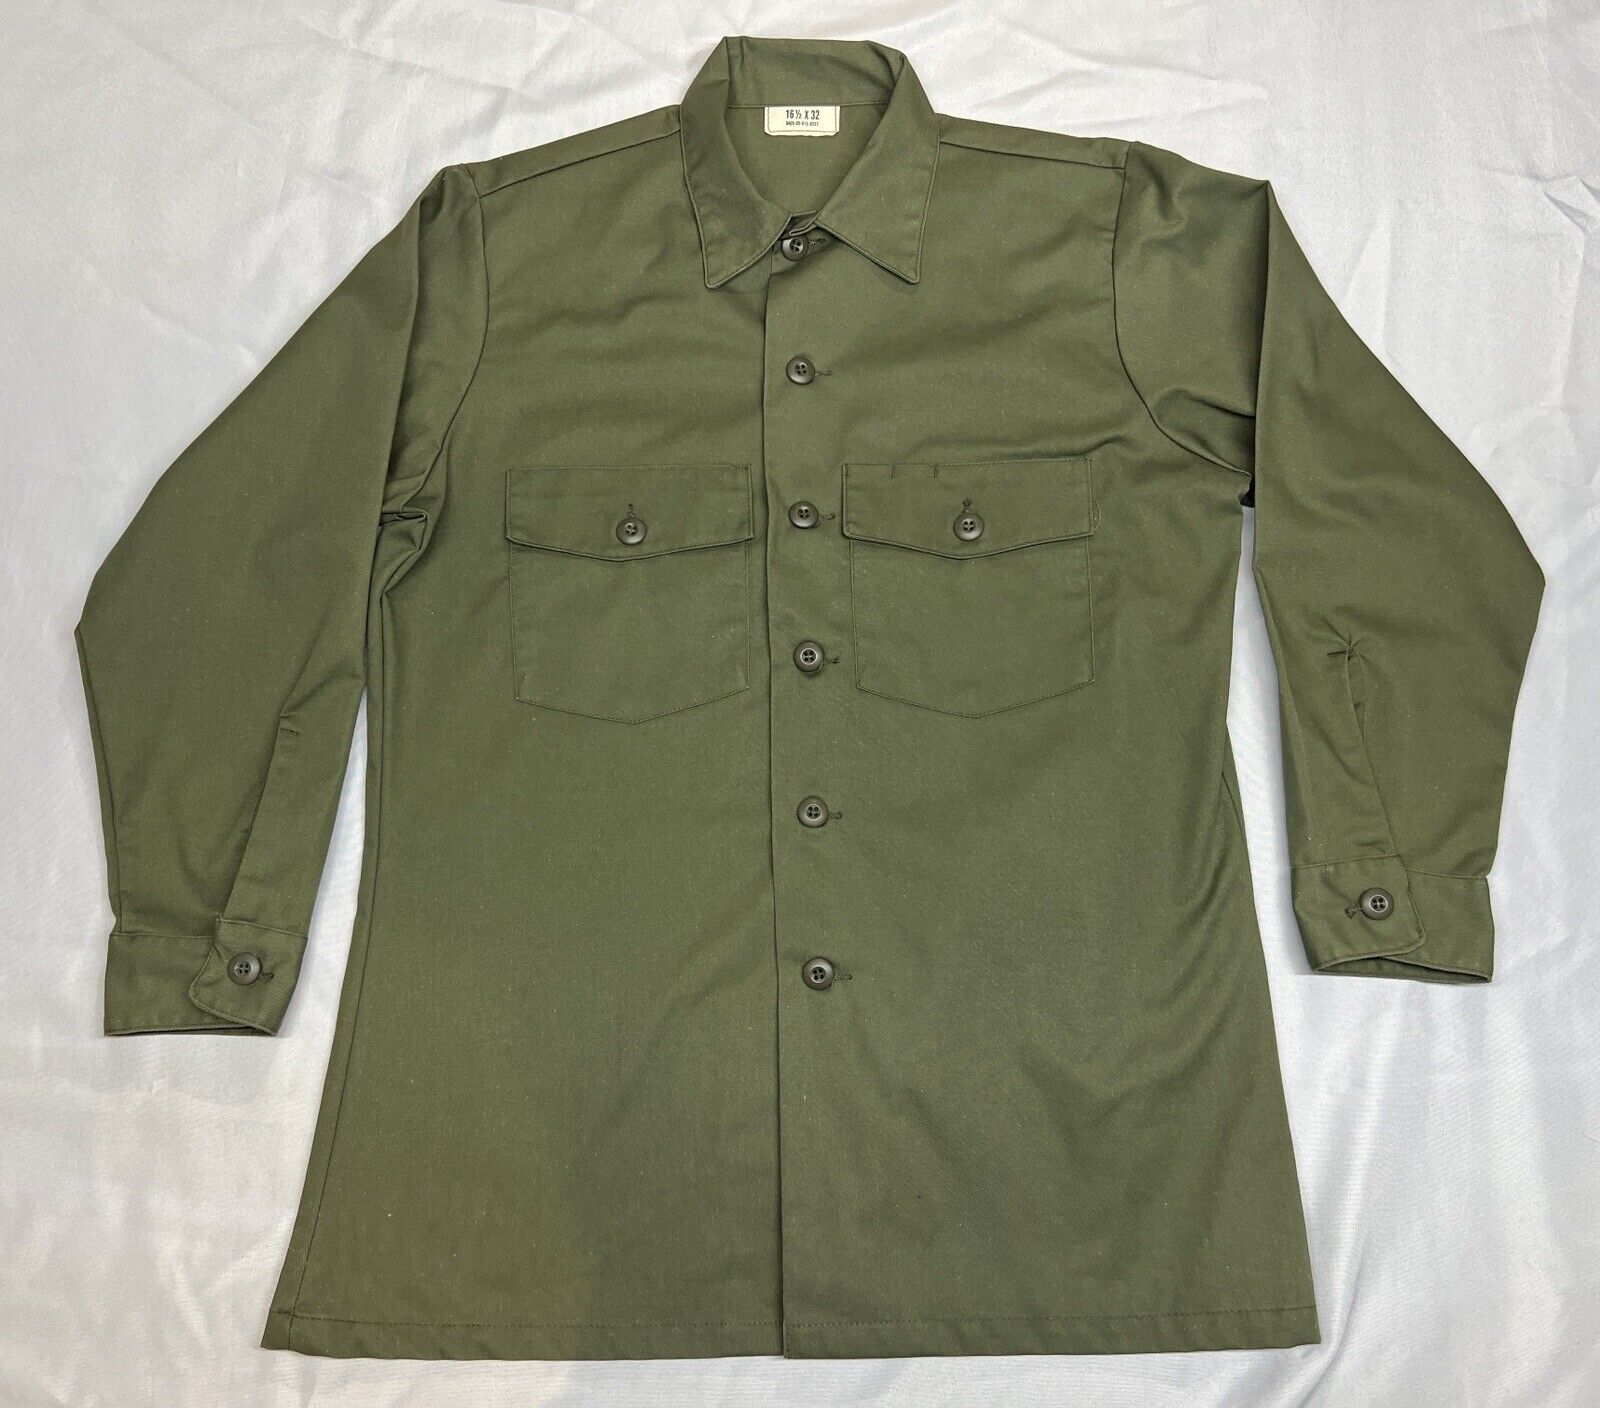 Vintage US Army Military OD Field Shirt/Jacket 16 1/2 X 32 Cotton/Poly